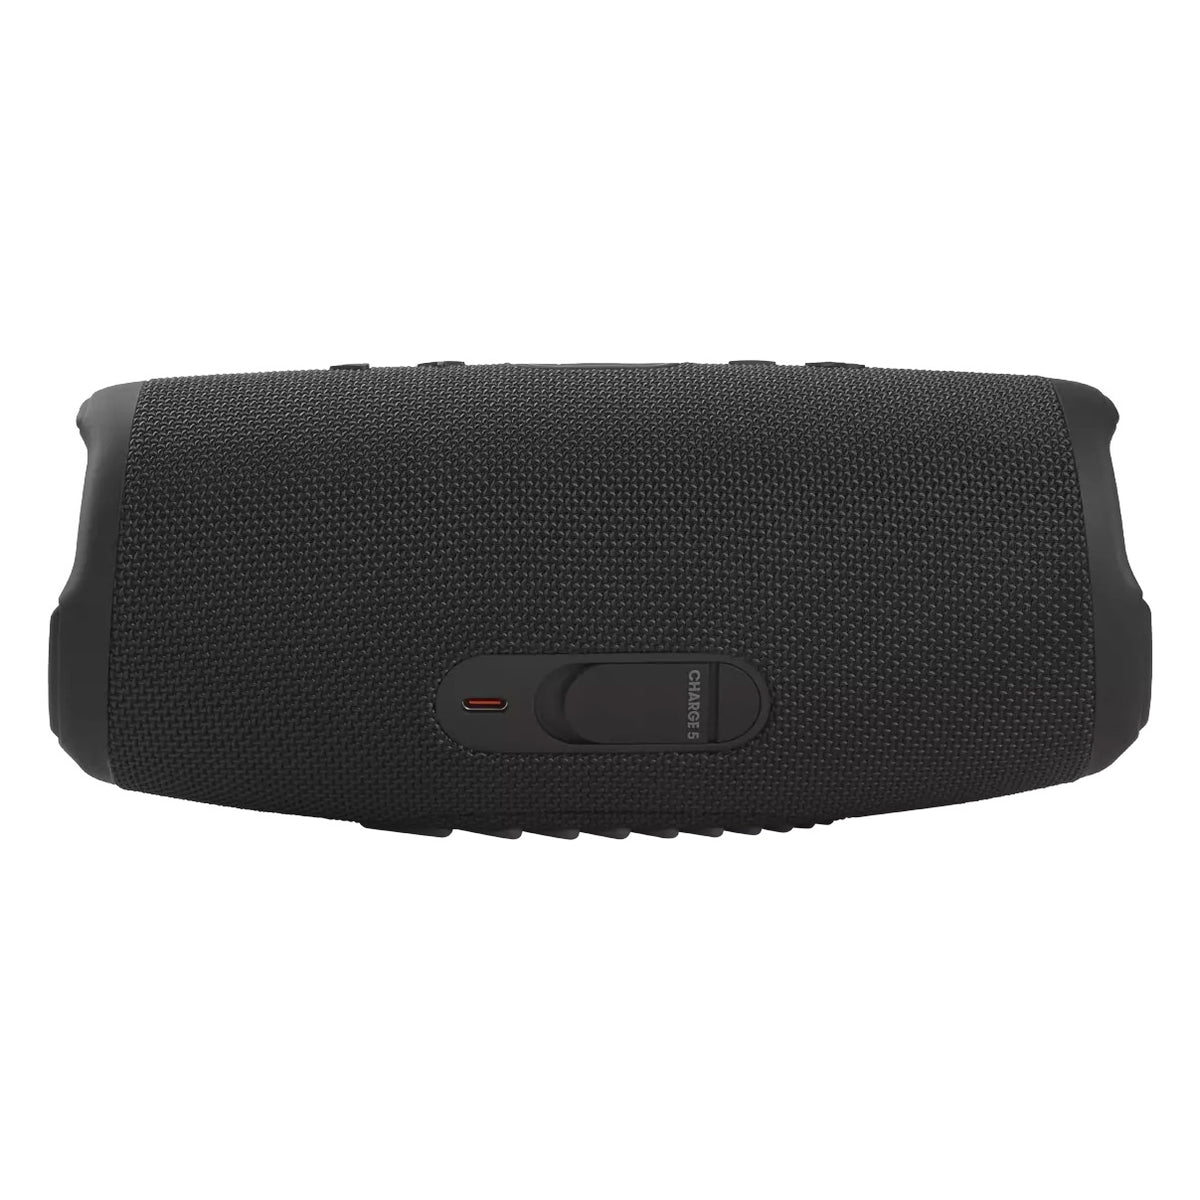 Bocina inalámbrica JBL Charge 5, IP67, Bluetooth, color negro - Multimax